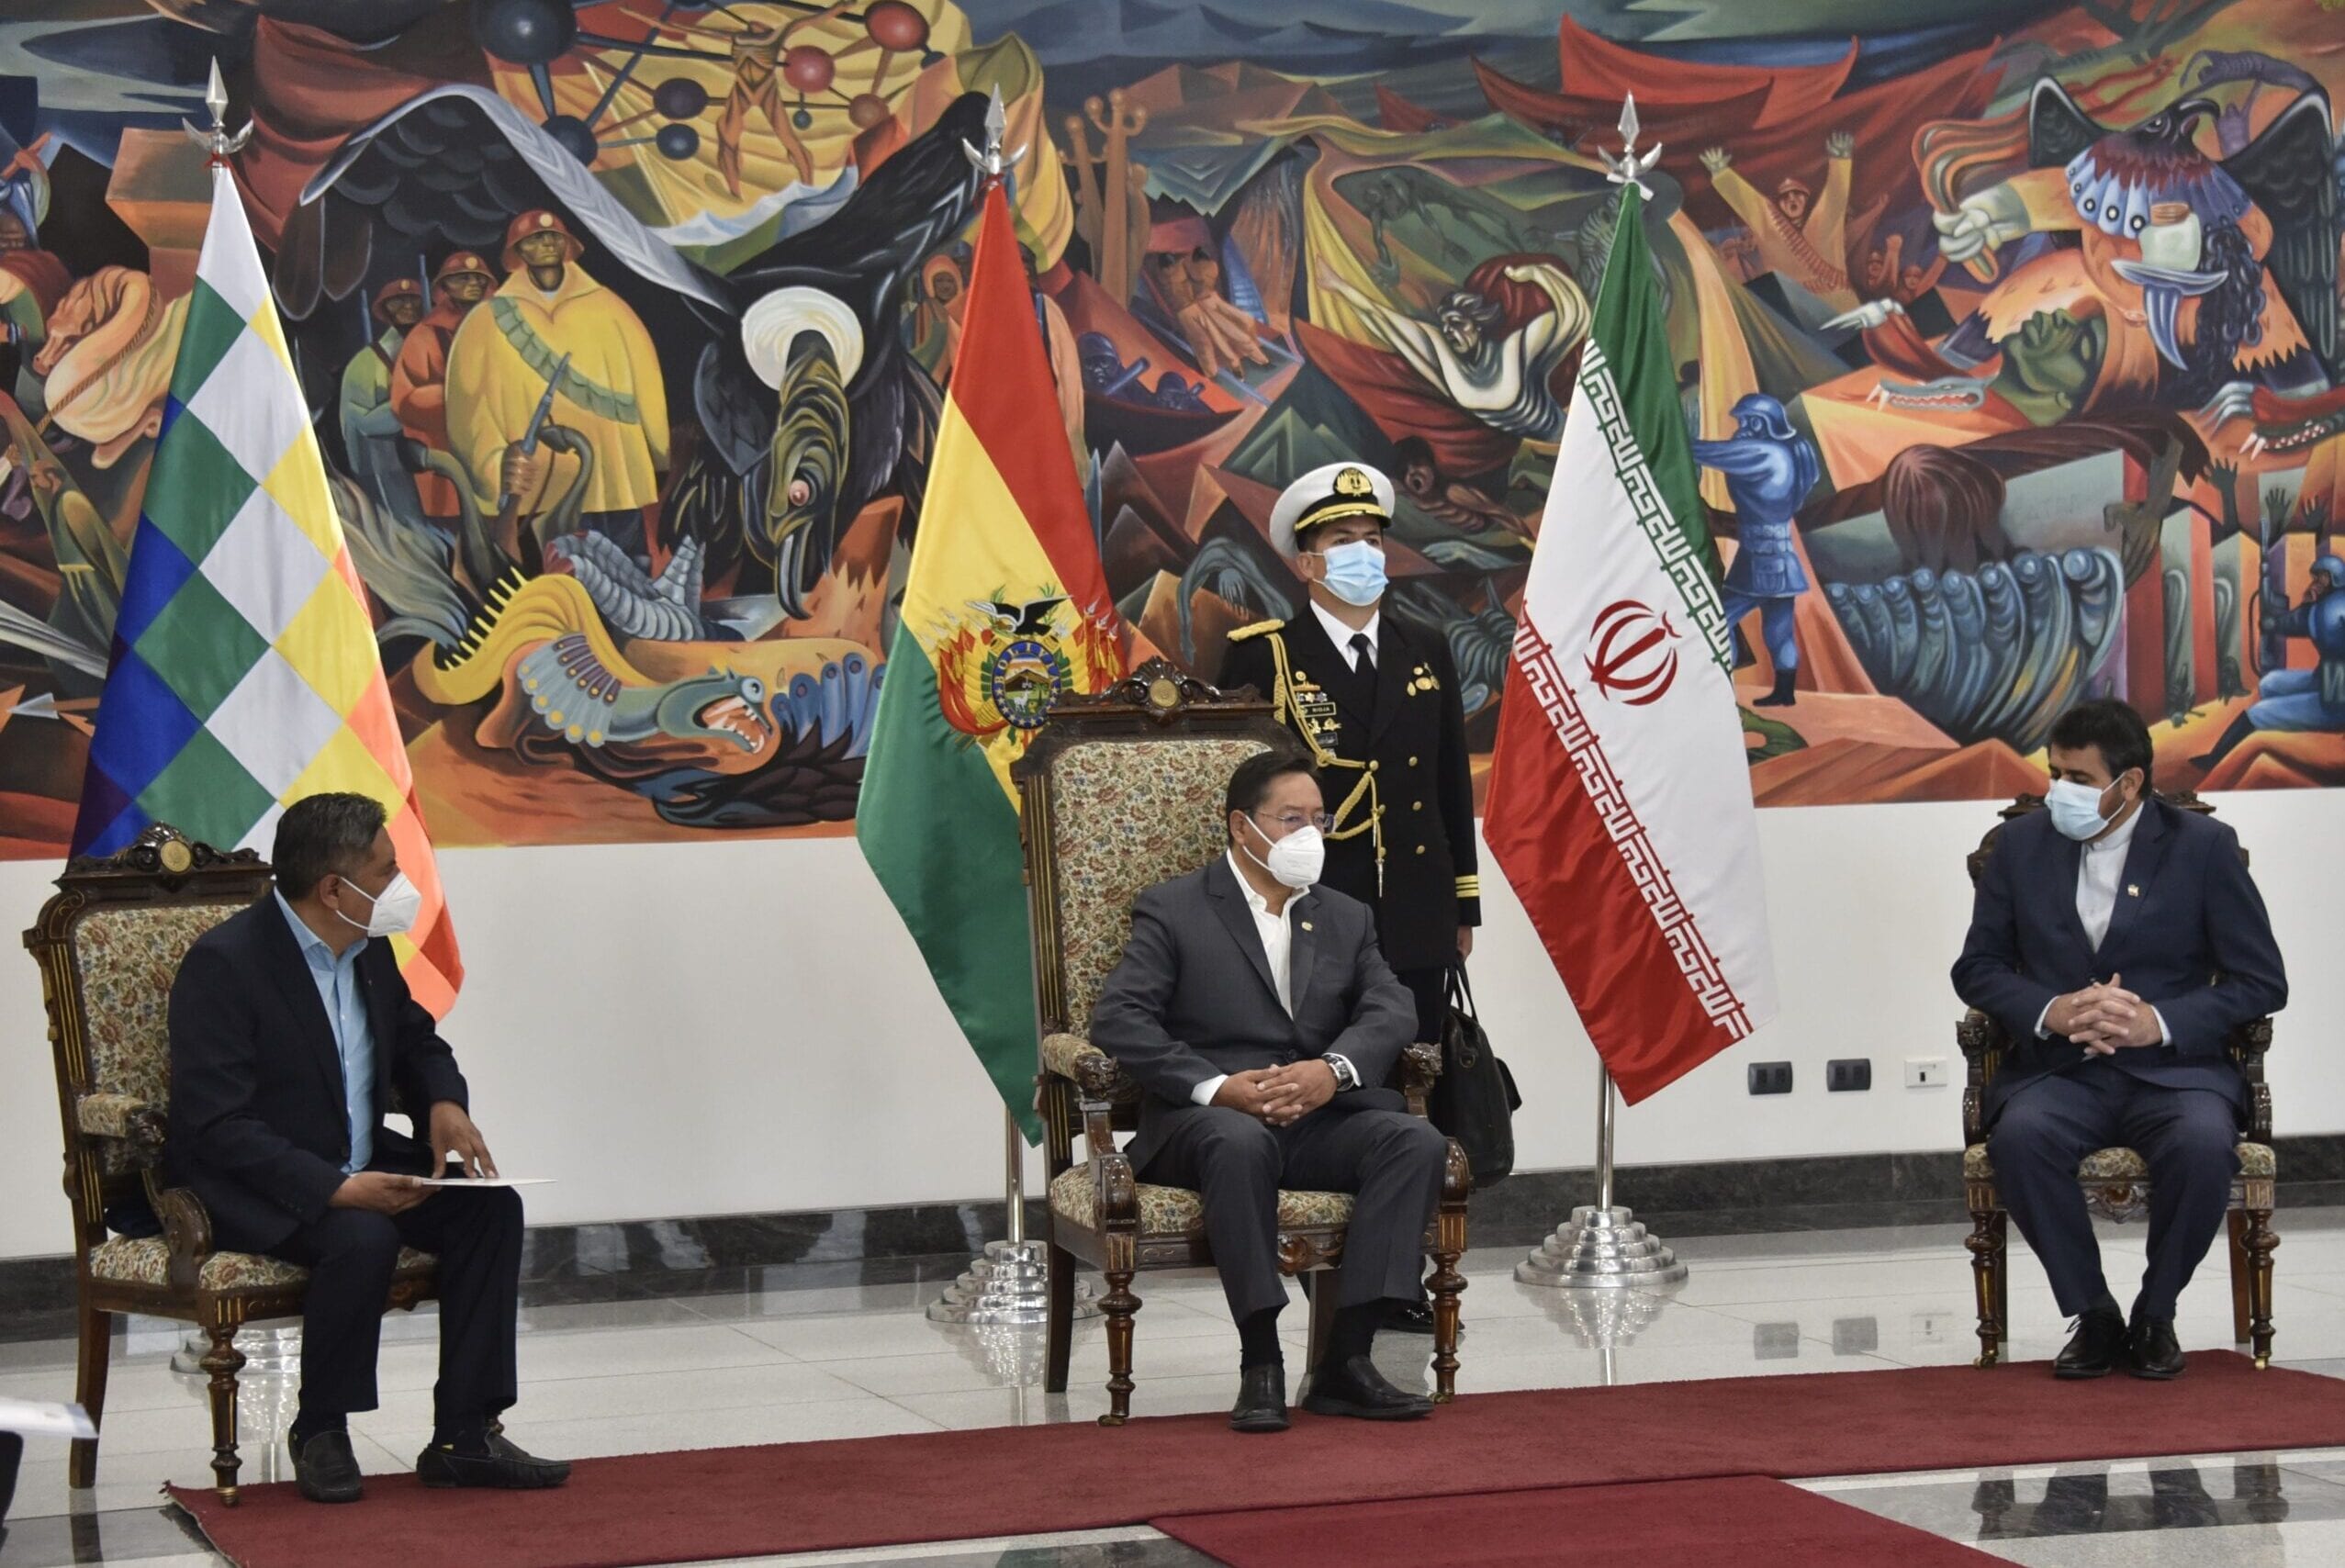 Bolivian President Luis Arce (C) and Foreign Minister Rogelio Mayta (L) talk with Iran's new ambassador to Bolivia, Mortessa Tabreshi, during the credentials ceremony in La Paz, on November 11, 2020. (Photo by Aizar RALDES / AFP) (Photo by AIZAR RALDES/AFP via Getty Images)